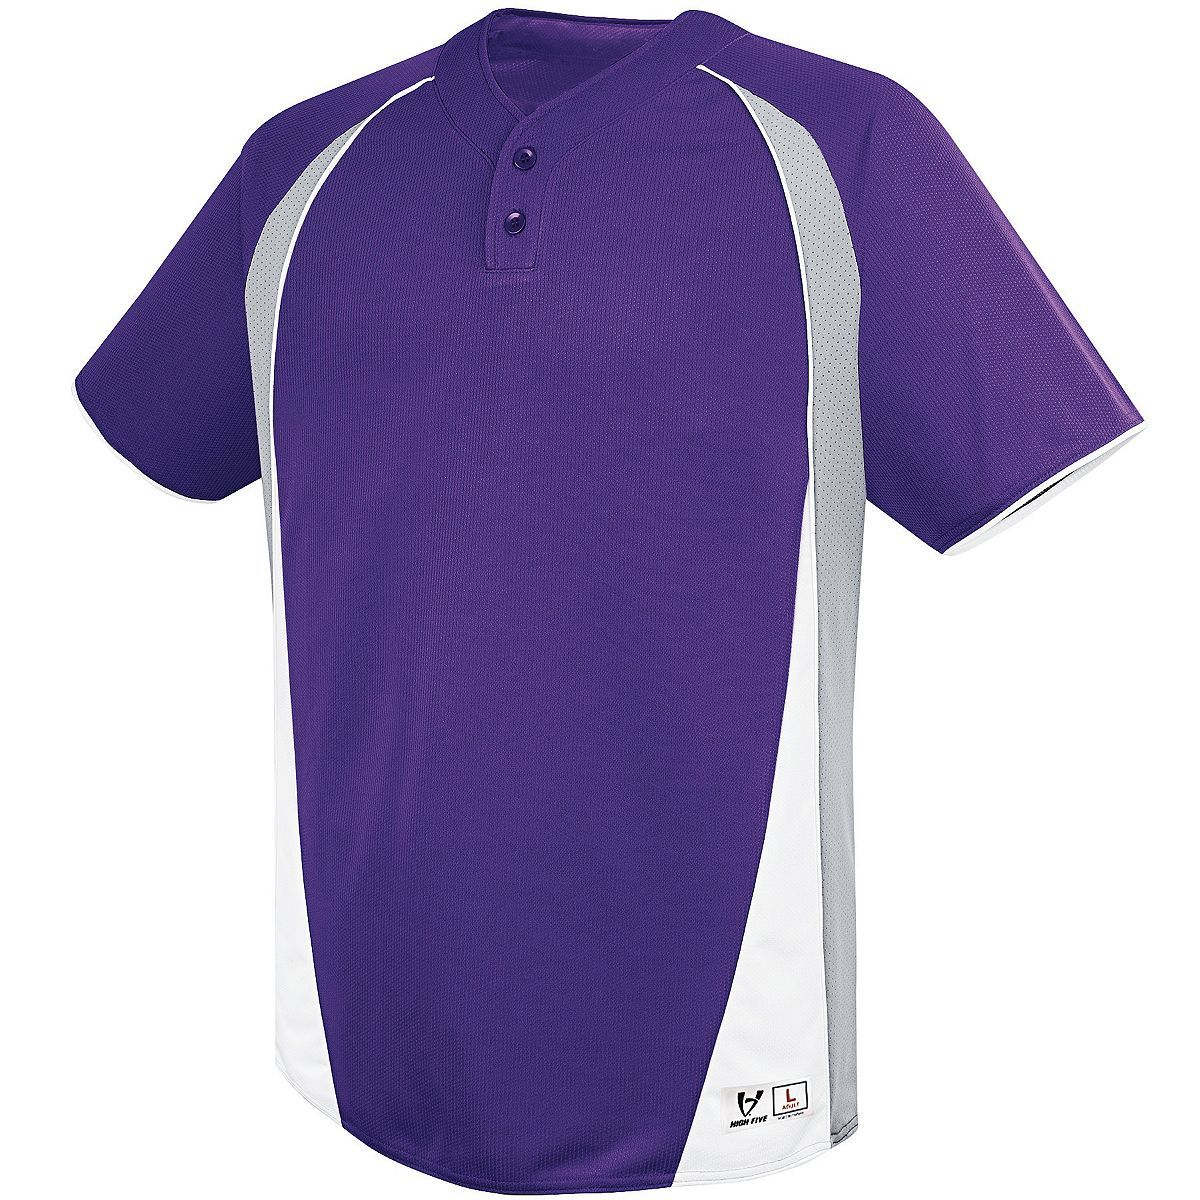 Augusta Sportswear Youth Ace Two-Button Jersey in Purple/Silver Grey/White  -Part of the Youth, Youth-Jersey, Augusta-Products, Baseball, Shirts, All-Sports, All-Sports-1 product lines at KanaleyCreations.com